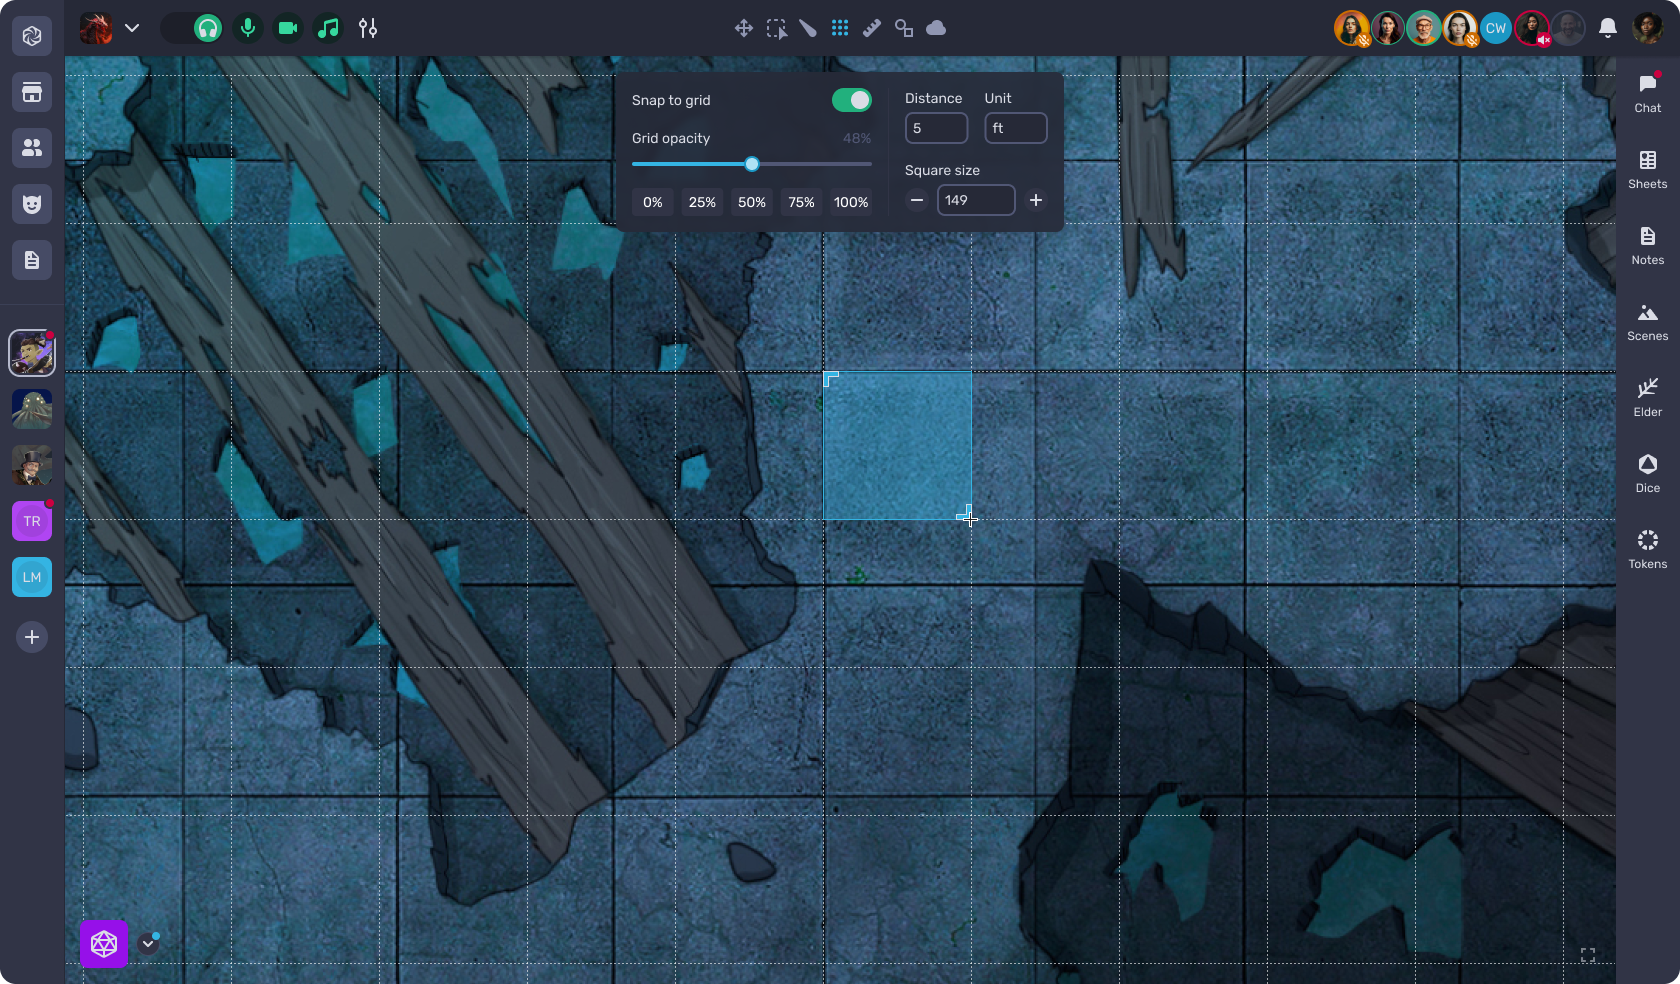 The grid tool allows you to add grid lines and adjust their size.